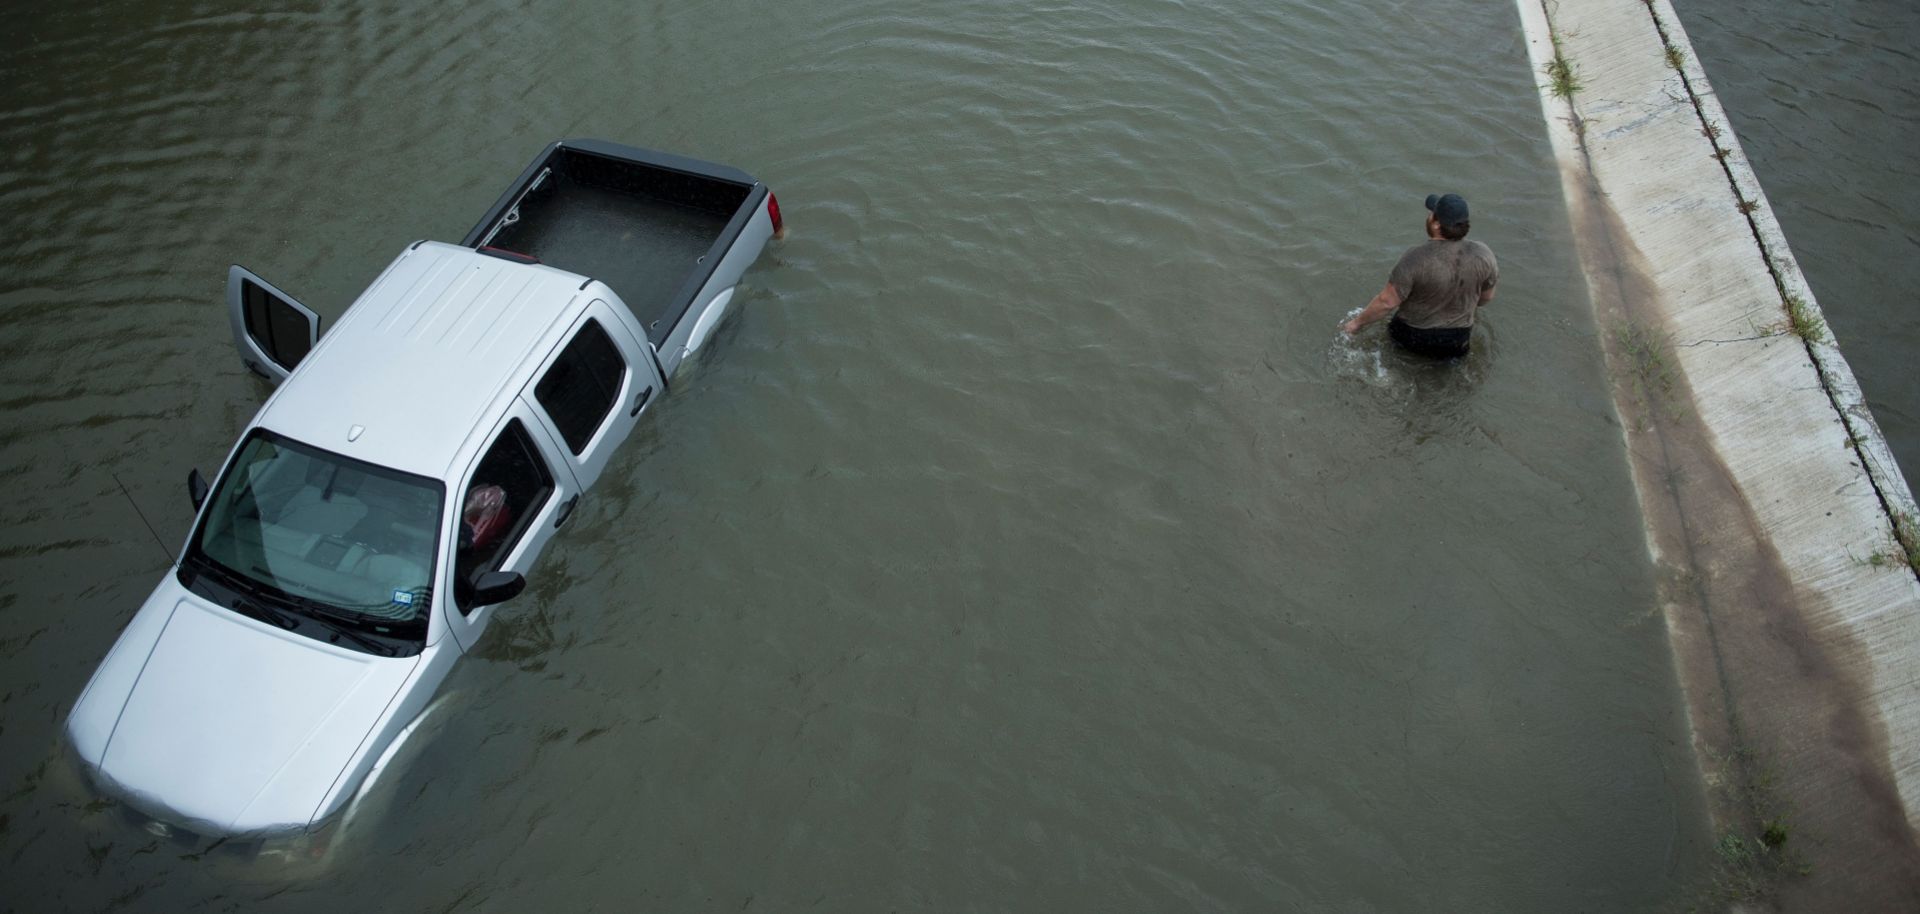 A driver walks past an abandoned truck while checking the depth of an underpass in the aftermath of Hurricane Harvey in Houston, Texas.